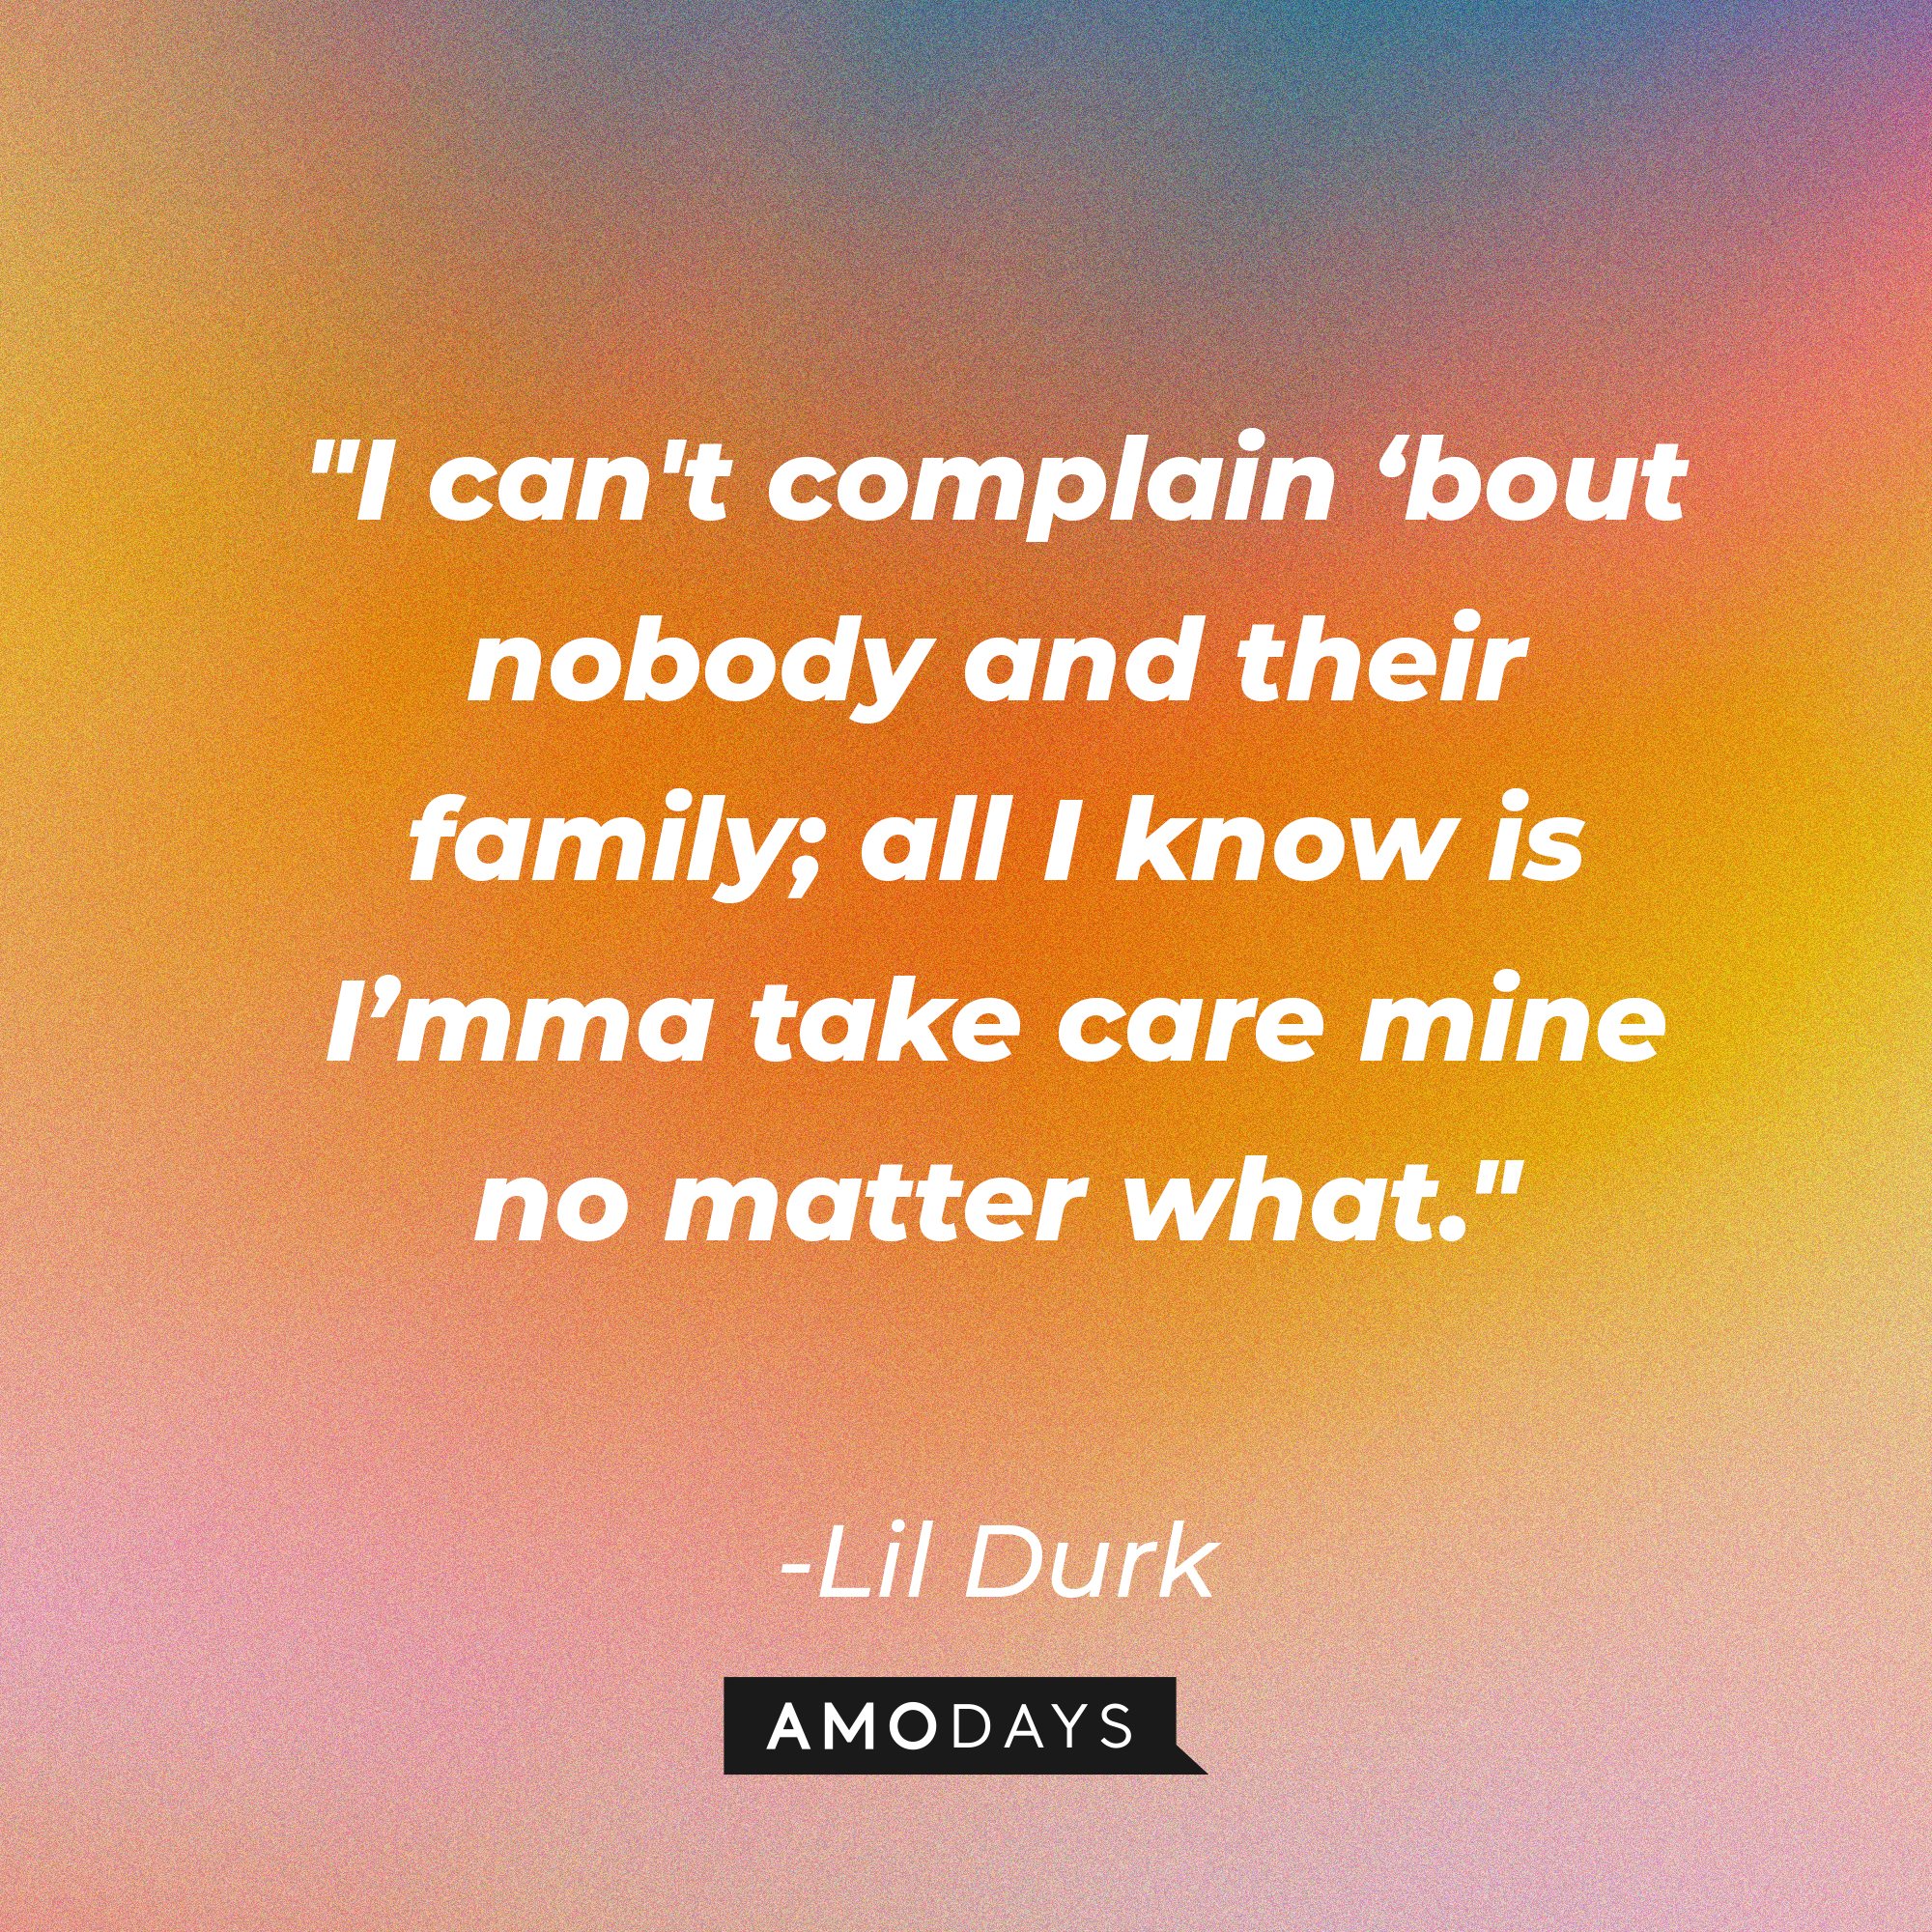 Lil Durk’s quote: "I can't complain ‘bout nobody and their family; all I know is I’mma take care mine no matter what." | Image: AmoDays 